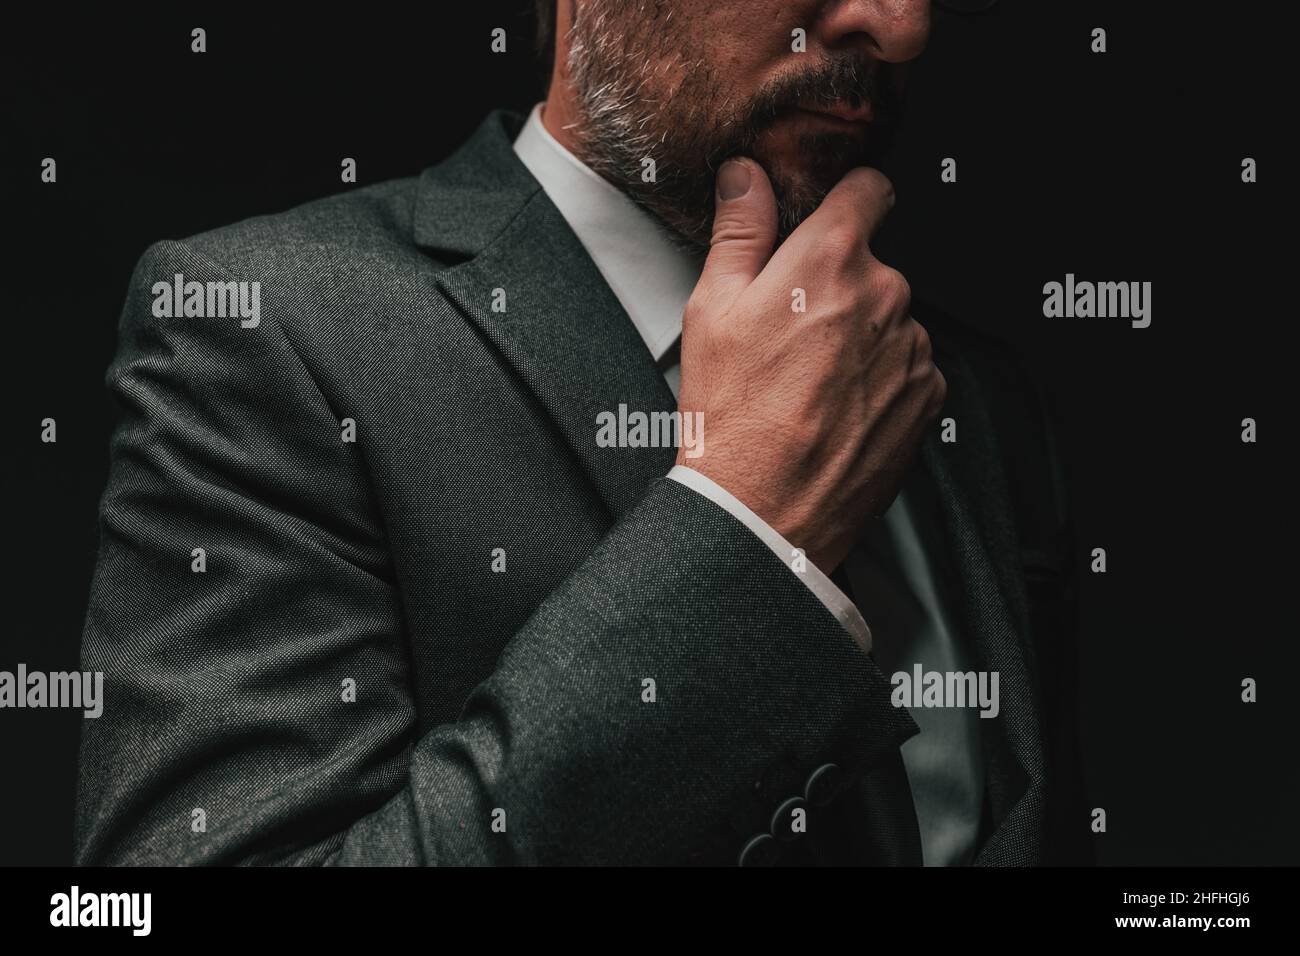 Consideration before starting a business, elegant businessman in gray suit thinking and planning, low key portrait with selective focus Stock Photo